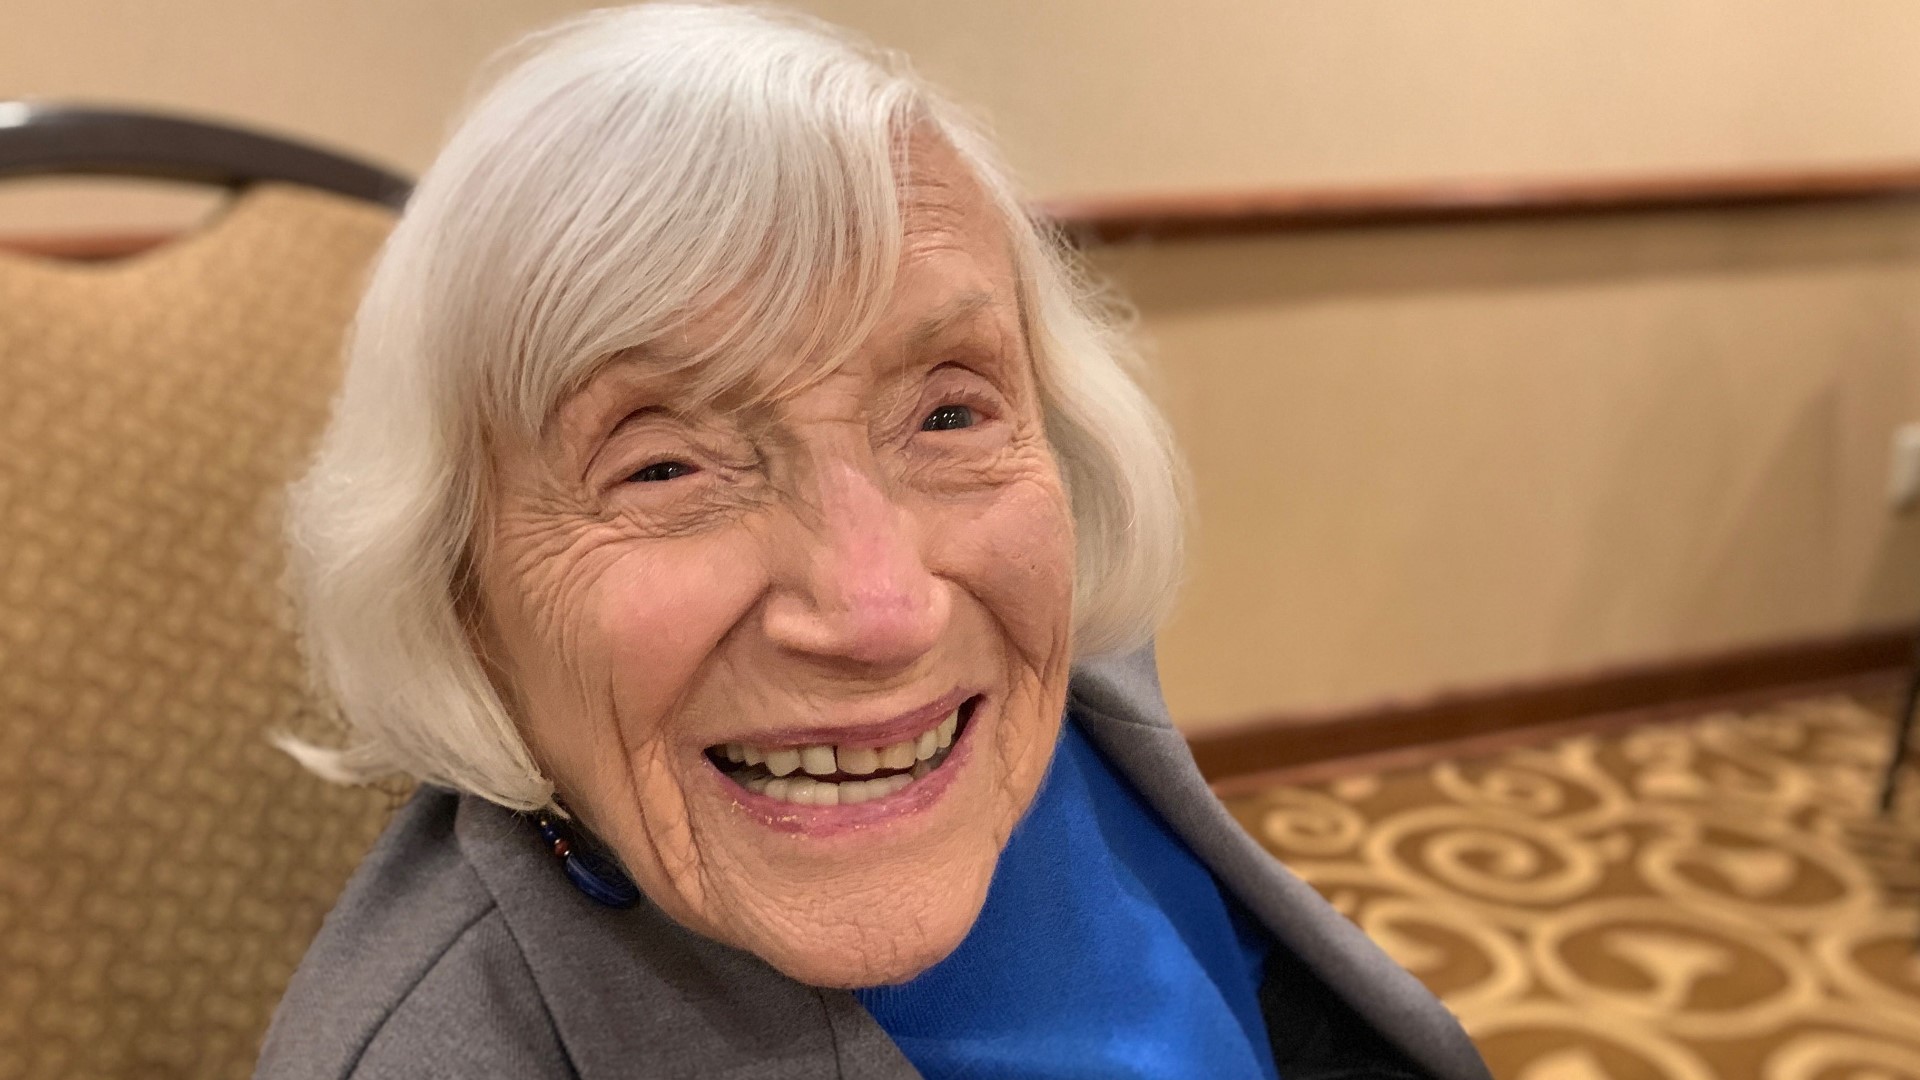 99-year-old Marthe Cohn spoke at USM on Wednesday, August 21 to share her story about joining the French Army and spying on Nazis as a Jewish woman.